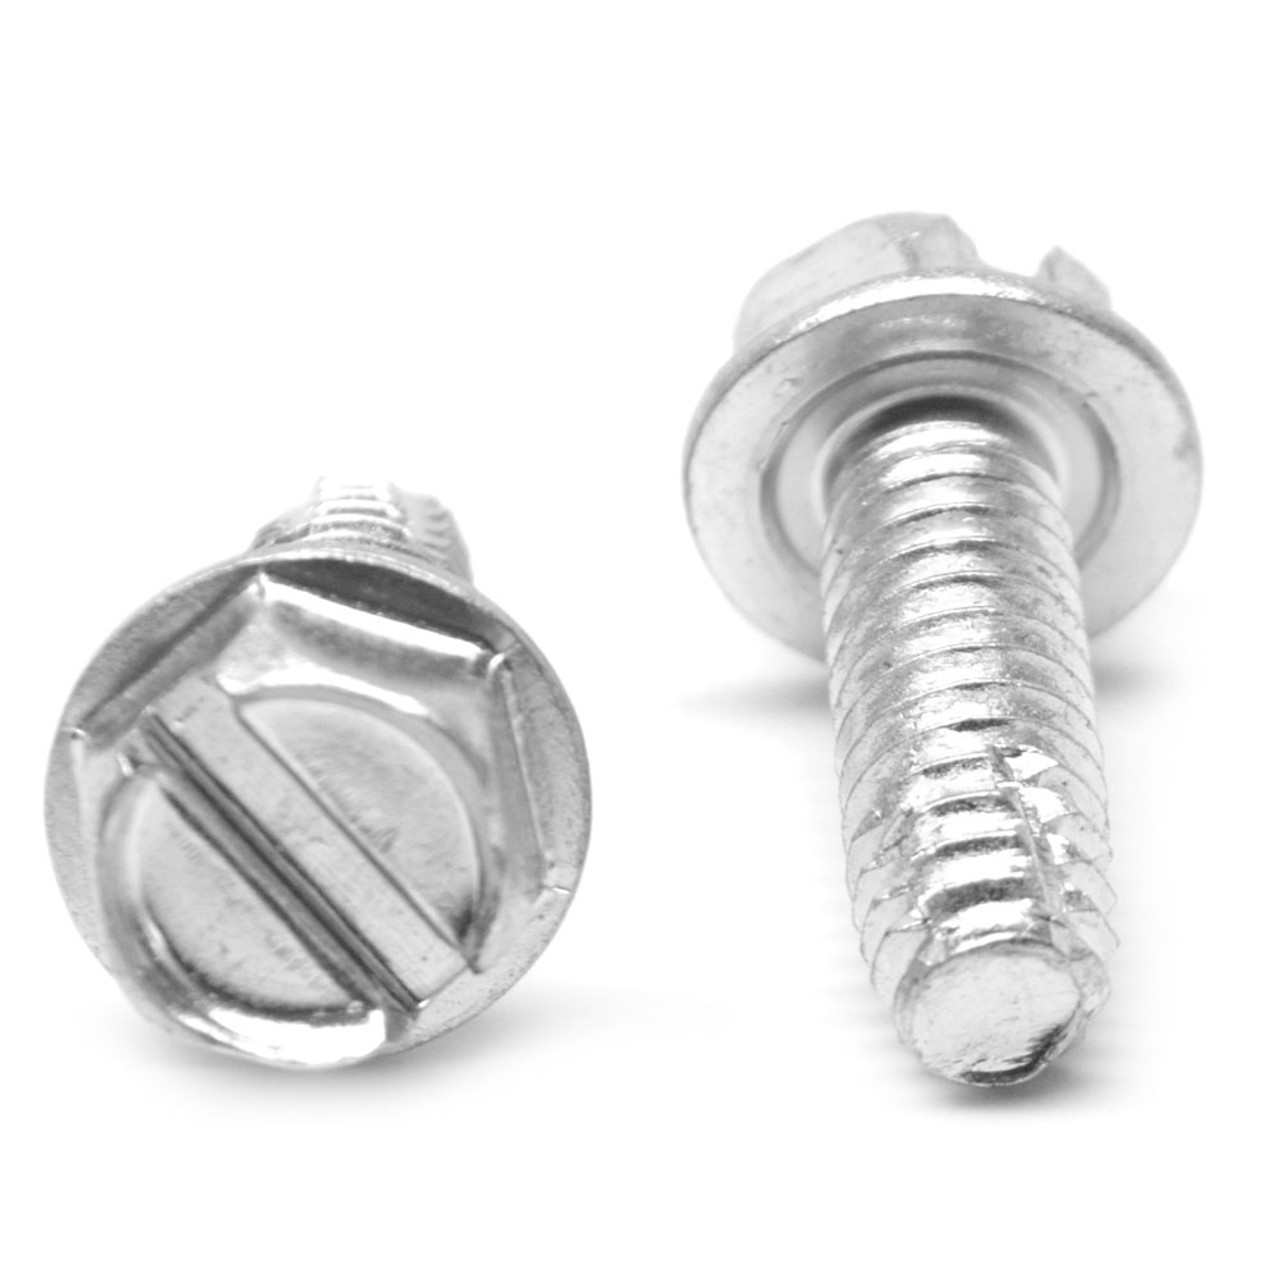 #8-32 x 1/2" (FT) Coarse Thread Thread Cutting Screw Slotted Hex Washer Head Type F Stainless Steel 18-8